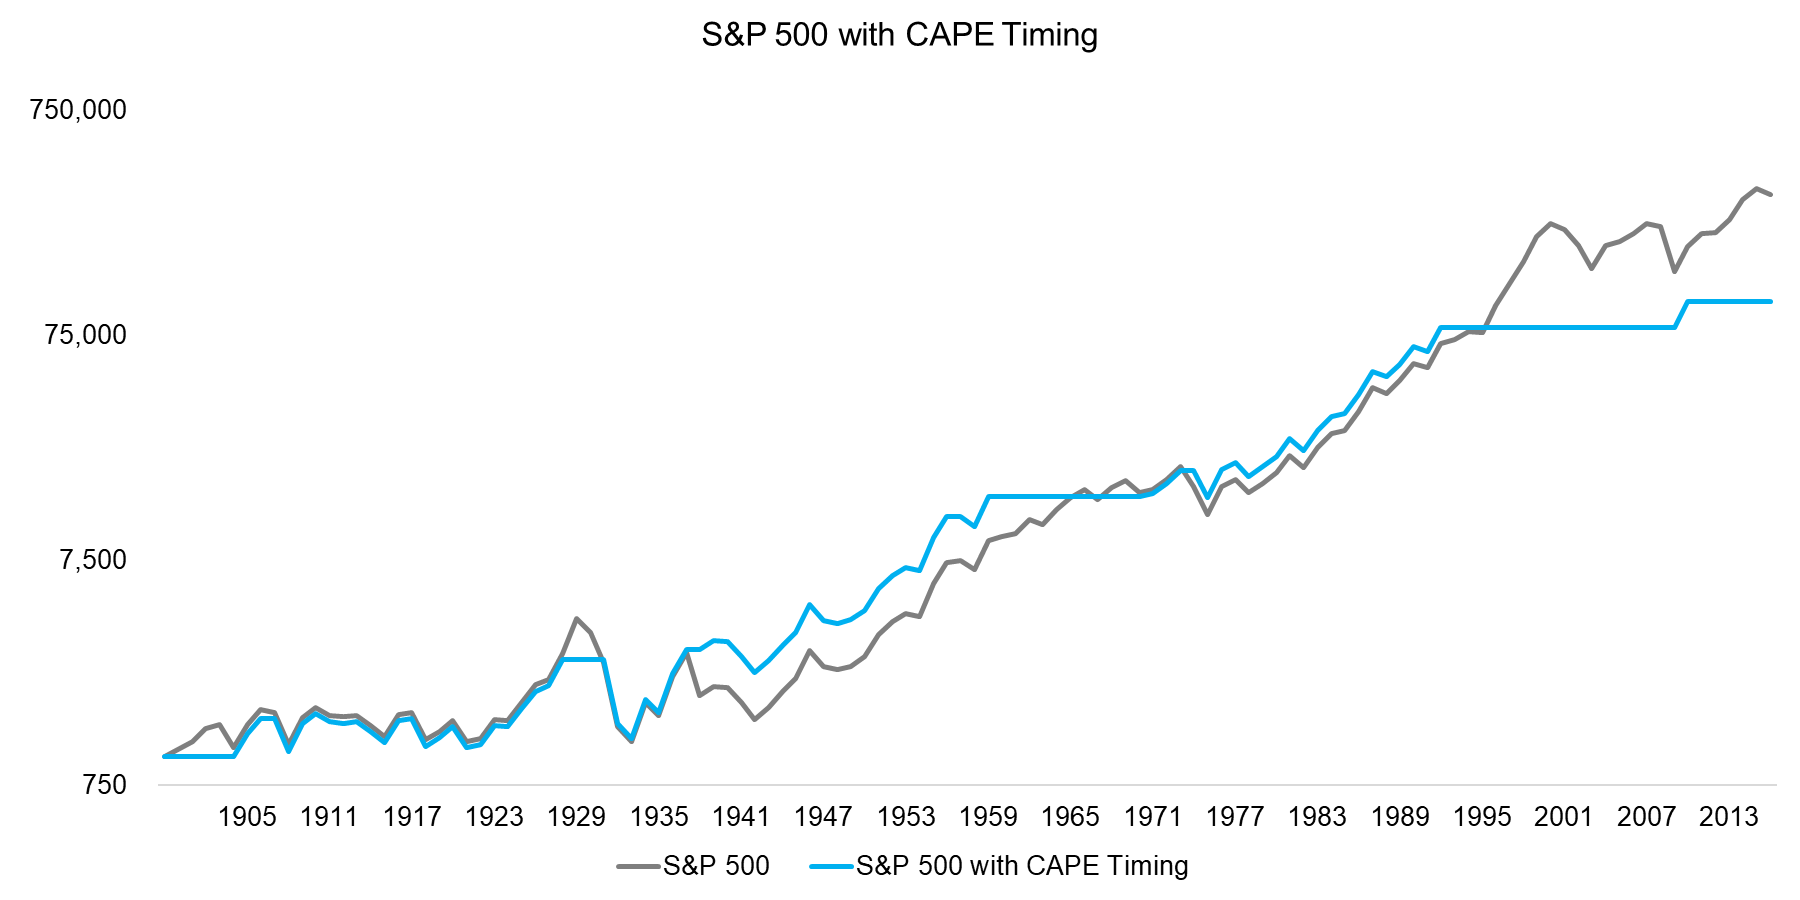 S&P 500 with CAPE Timing